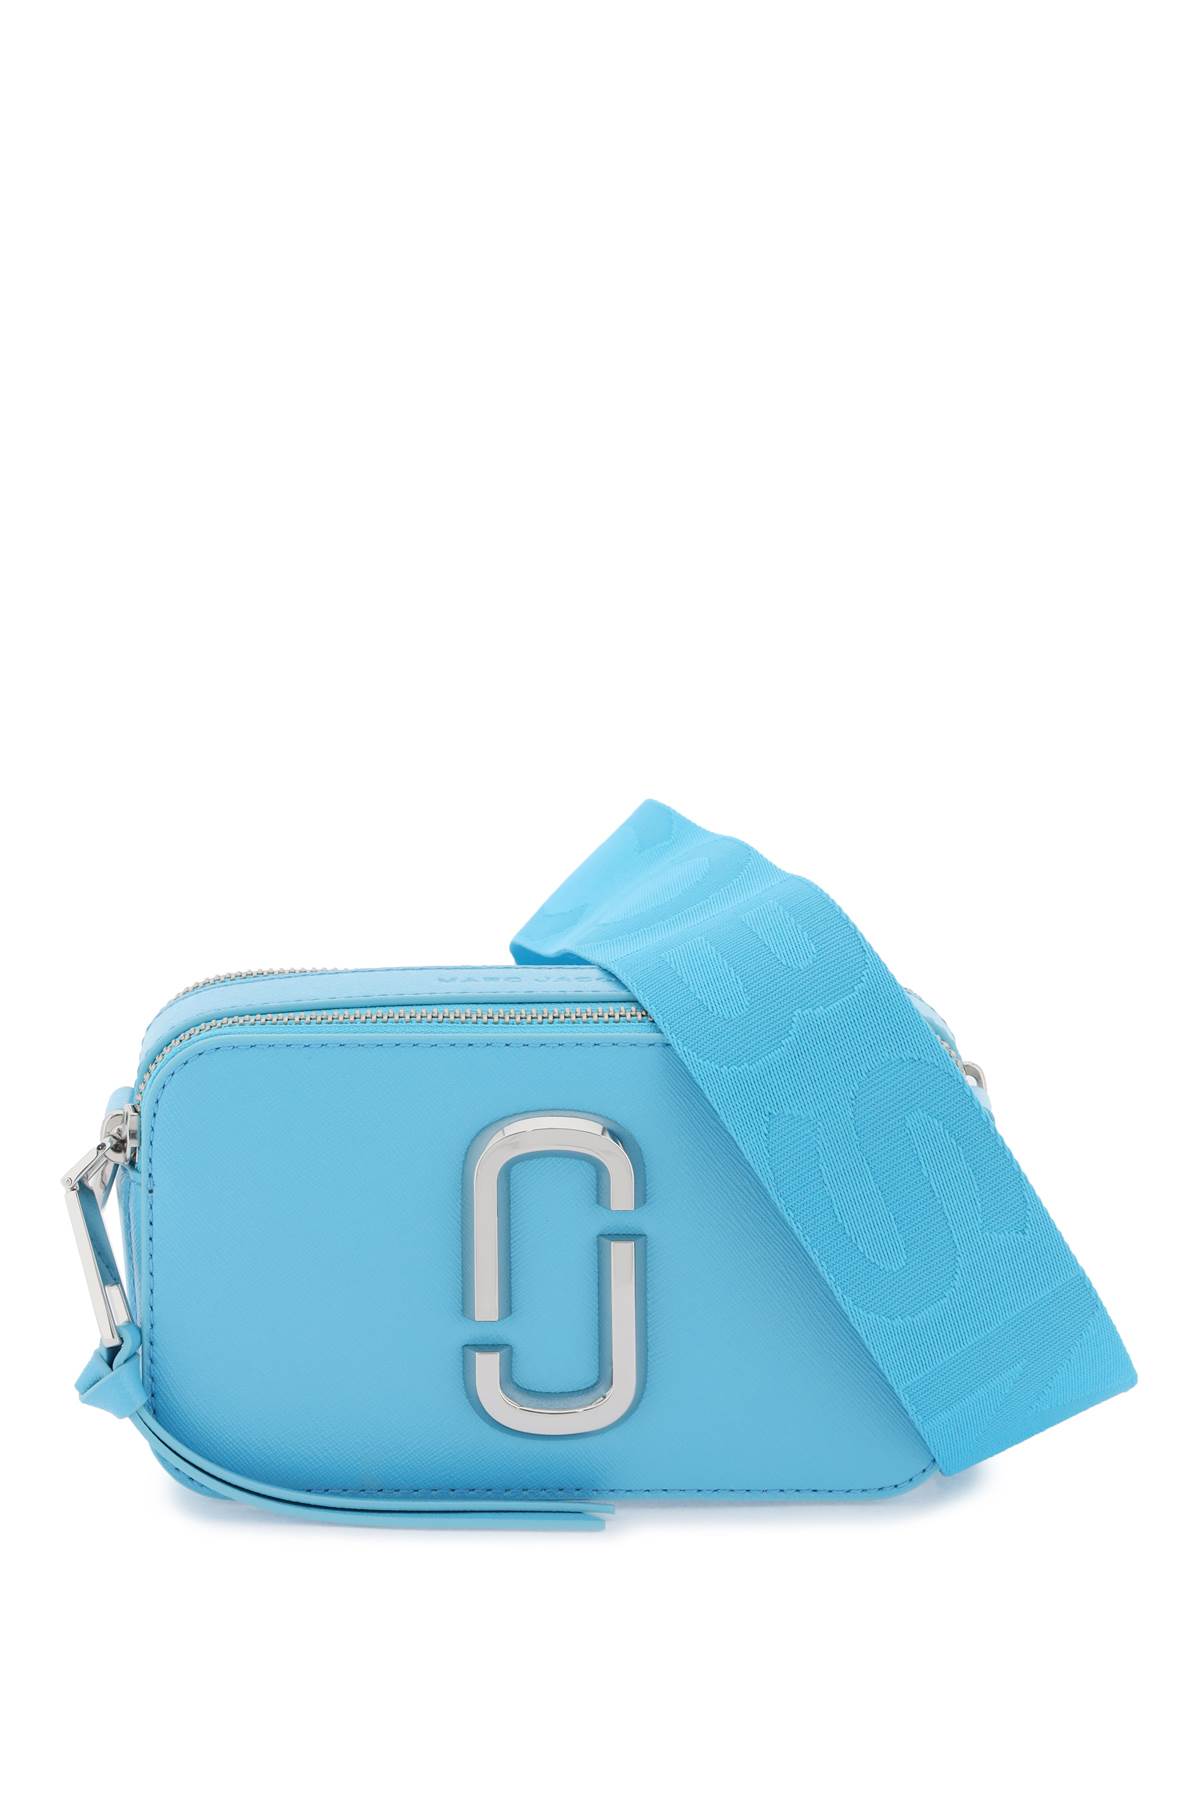 Marc Jacobs The Snapshot Leather Camera Bag - Green/Light Blue